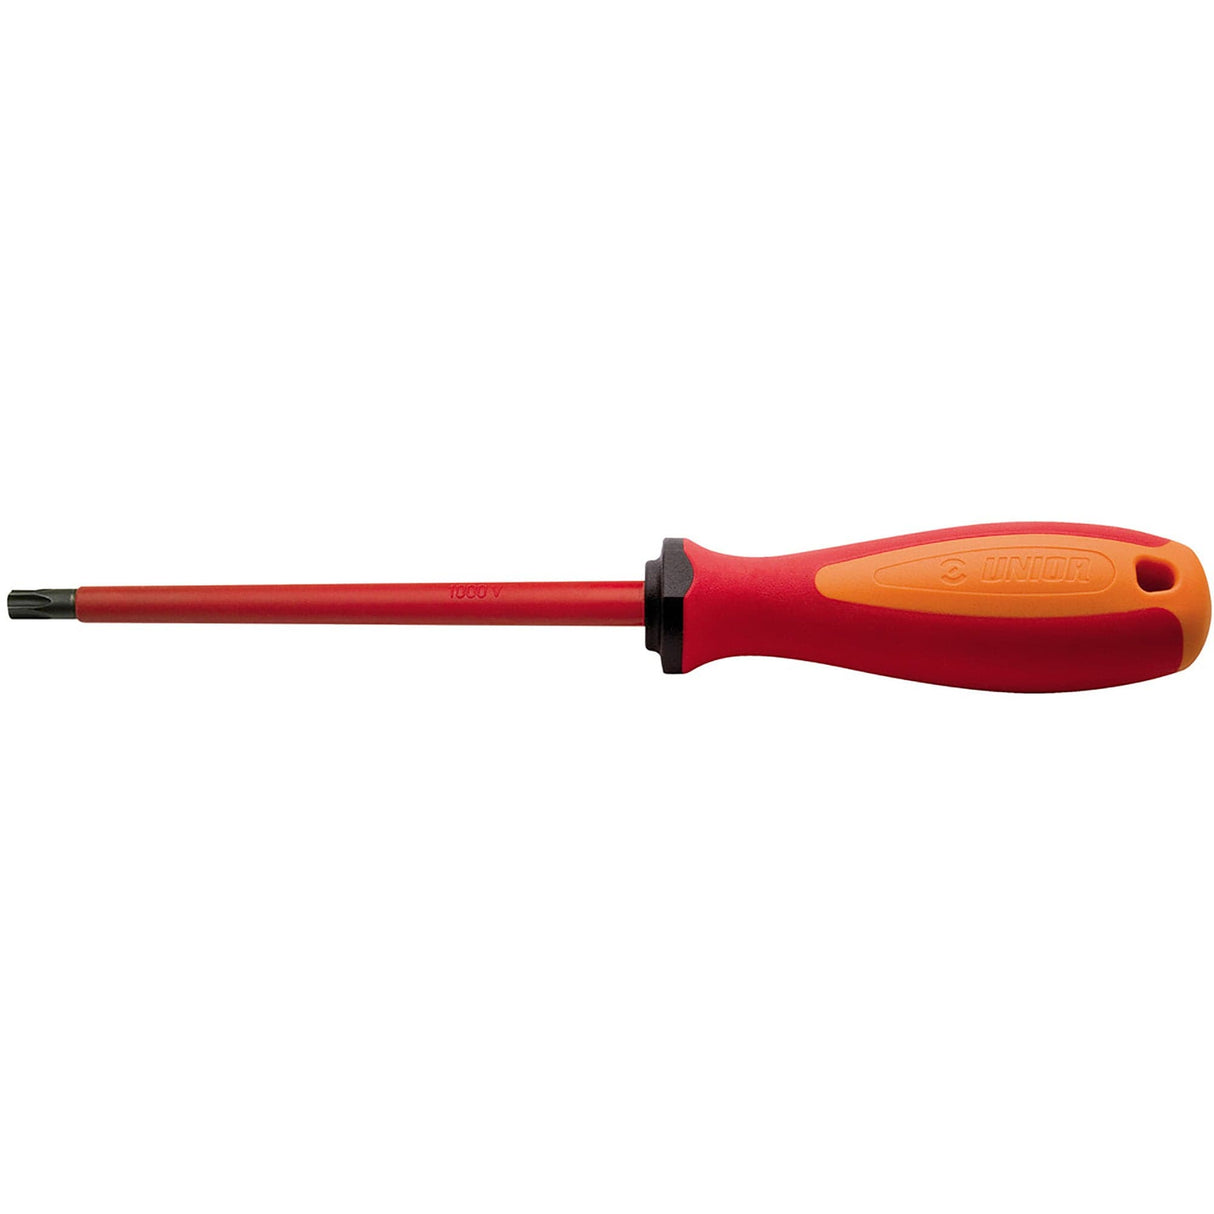 Unior Screwdriver Vde Tbi With Tx Profile: Red Tx 27